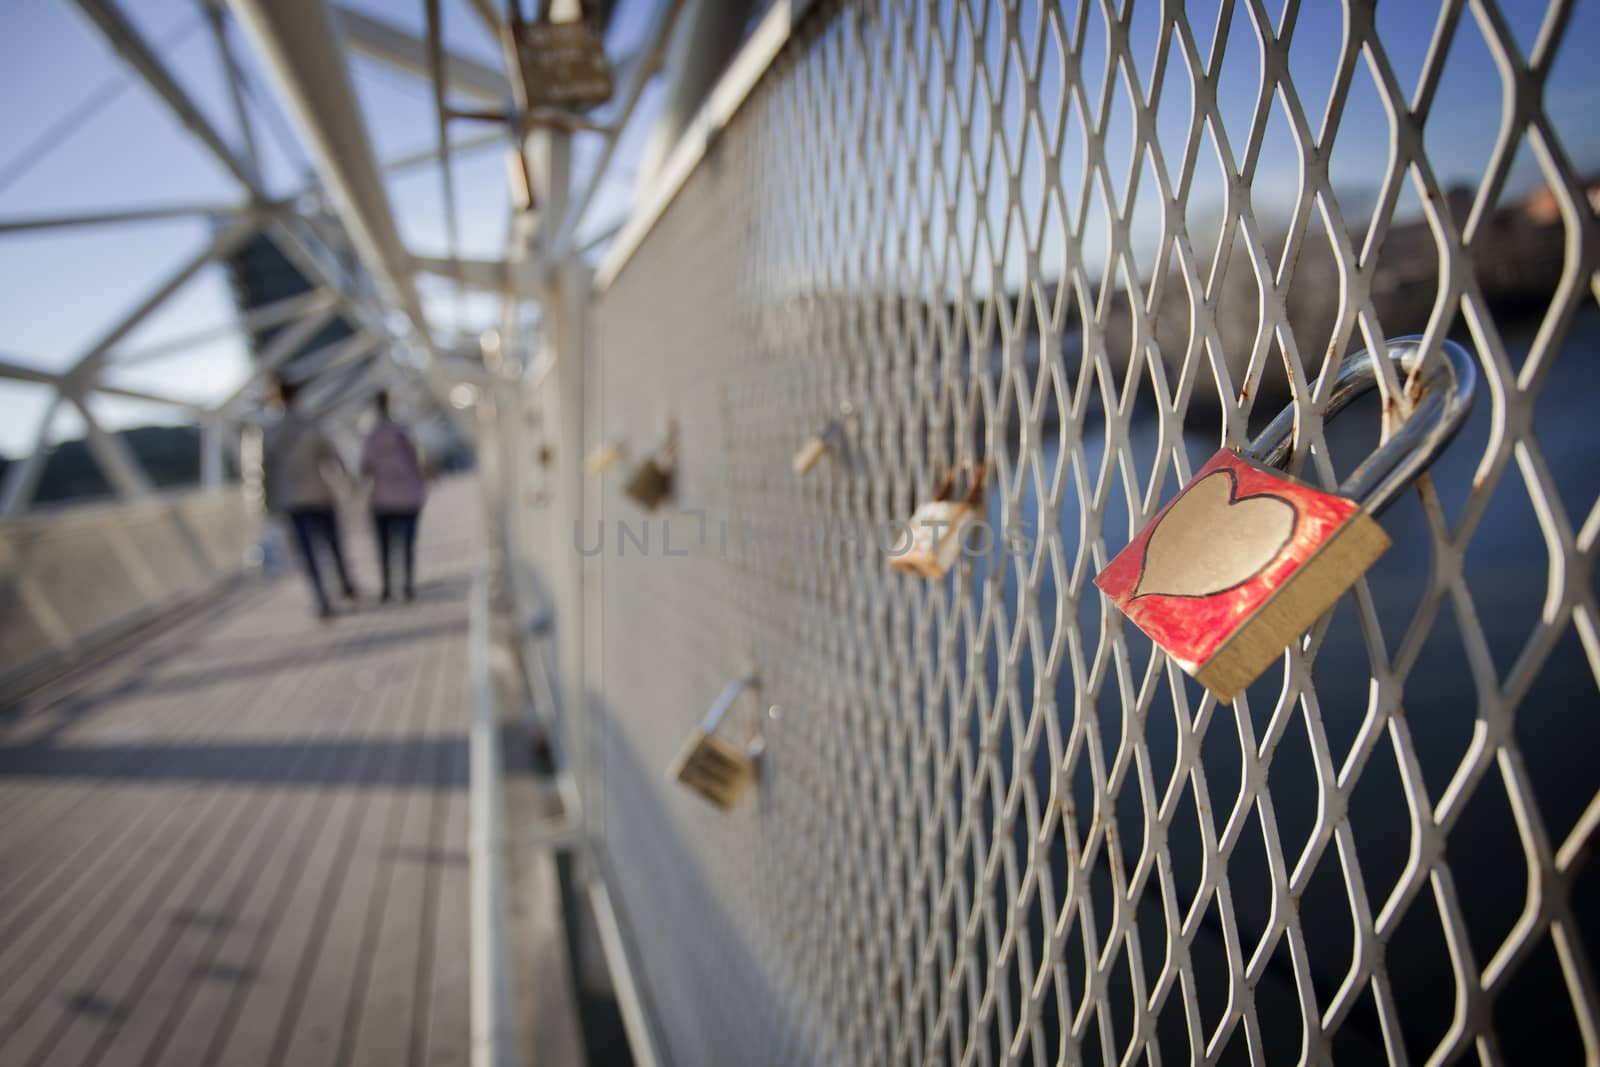 Padlock of love by demachy